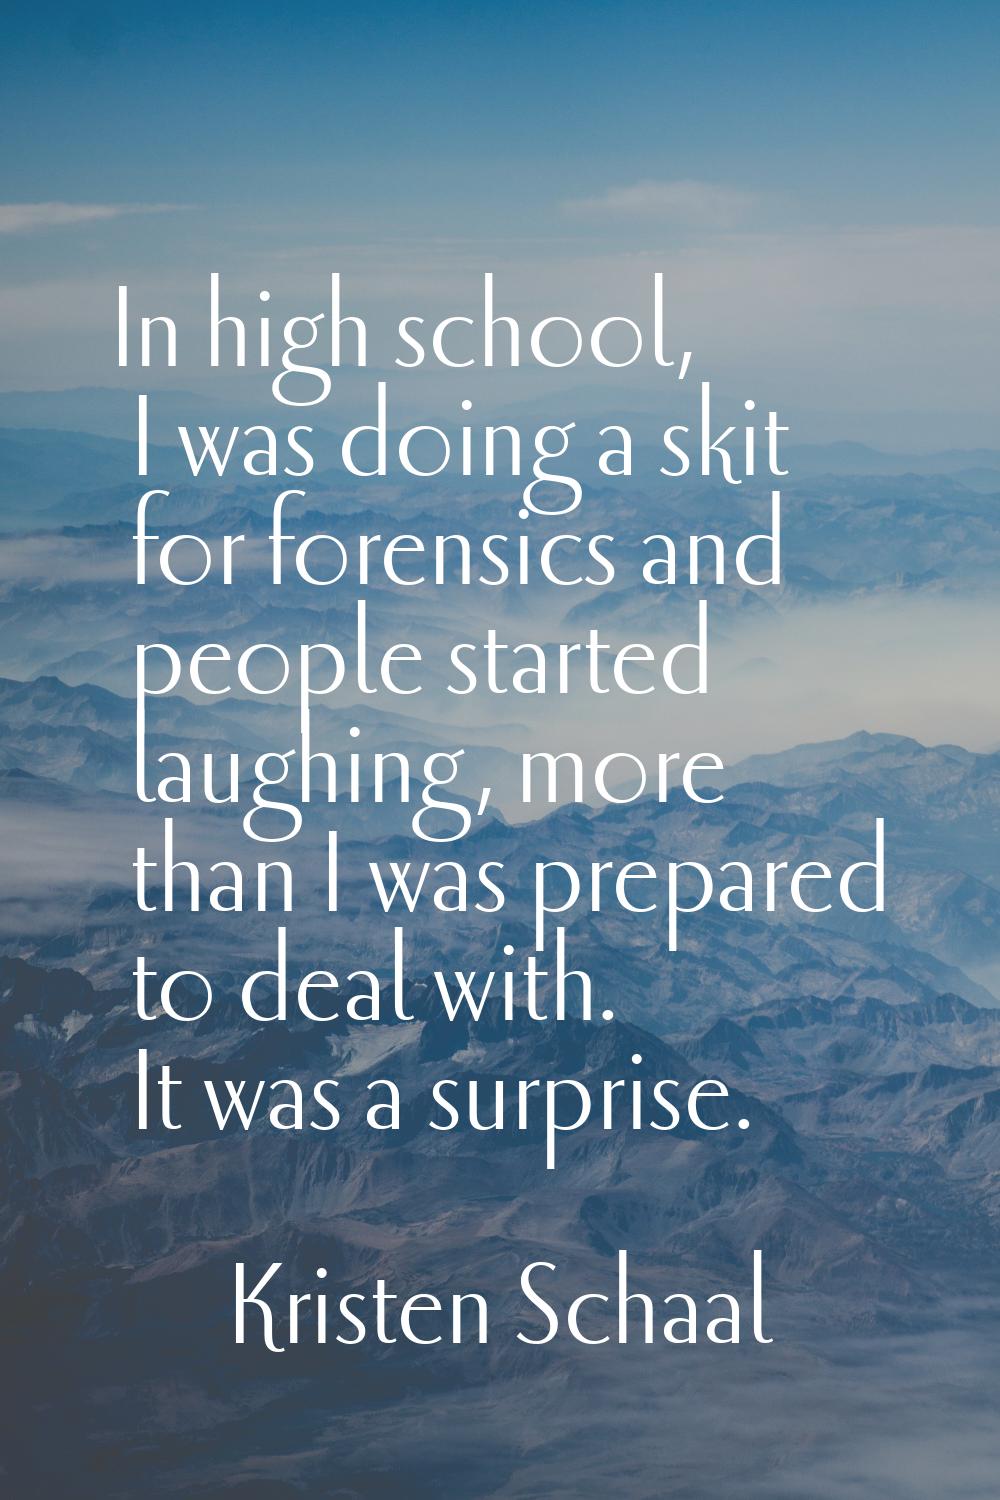 In high school, I was doing a skit for forensics and people started laughing, more than I was prepa